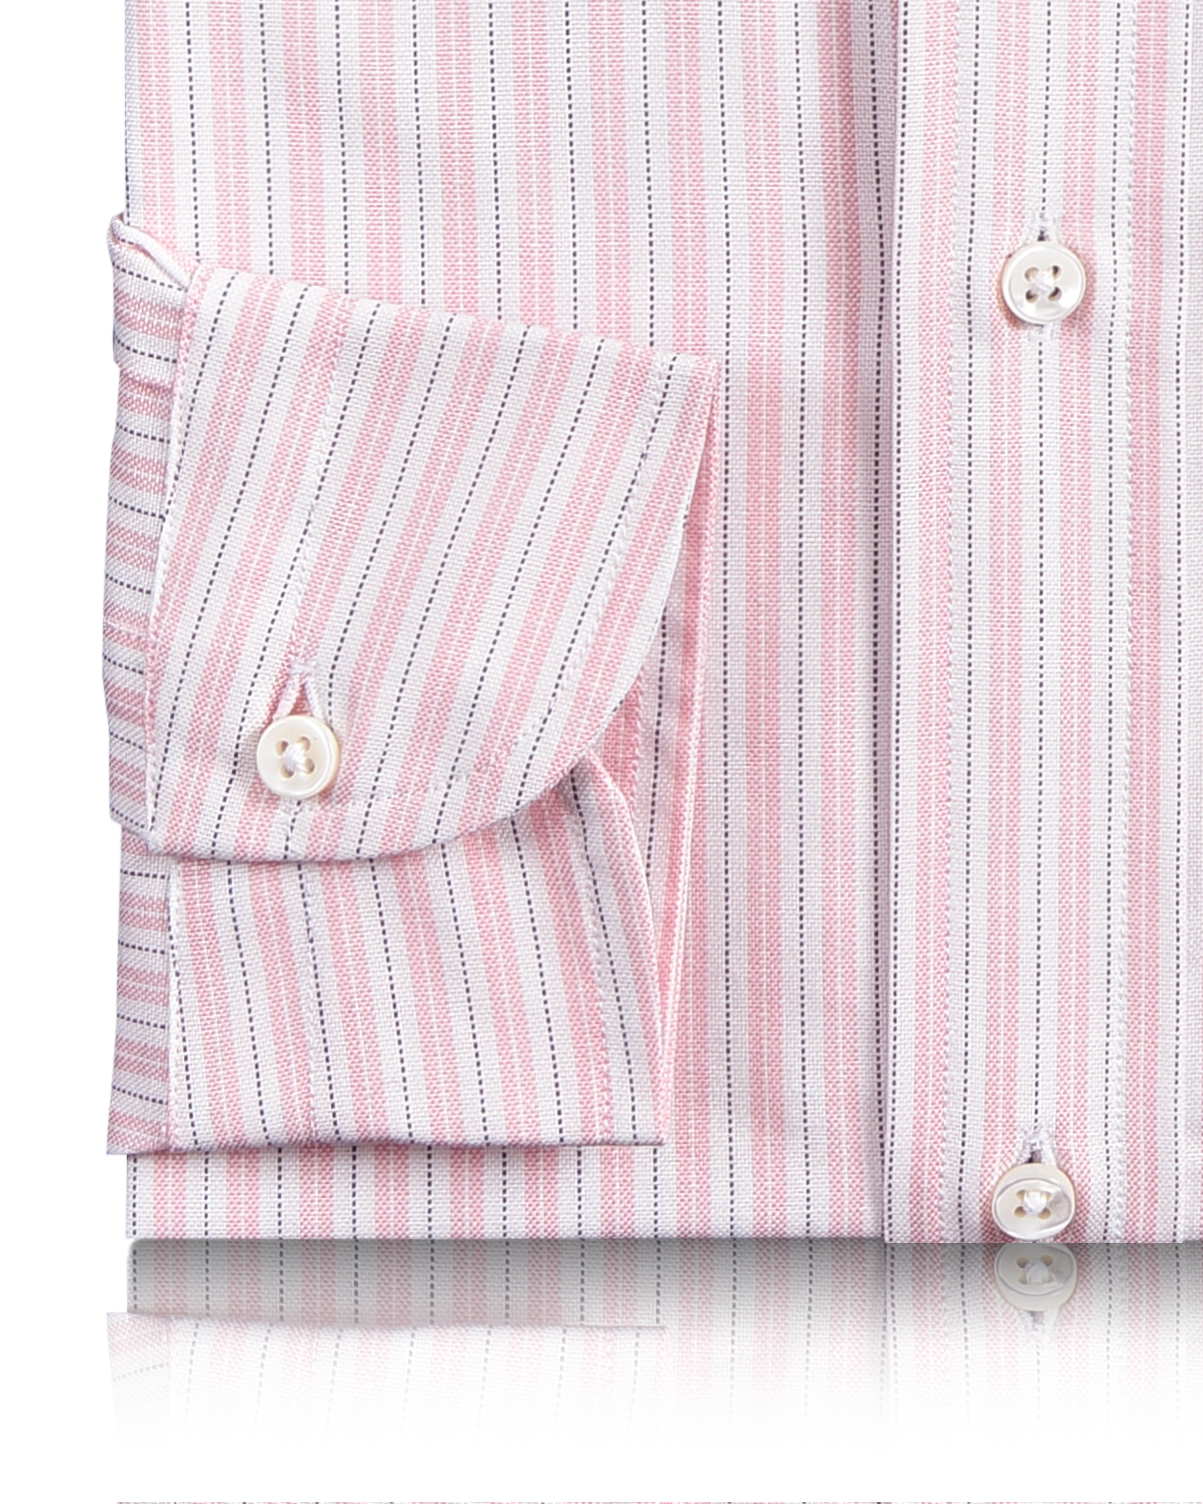 Cuff of the custom oxford shirt for men by Luxire in soft pink and navy stripes